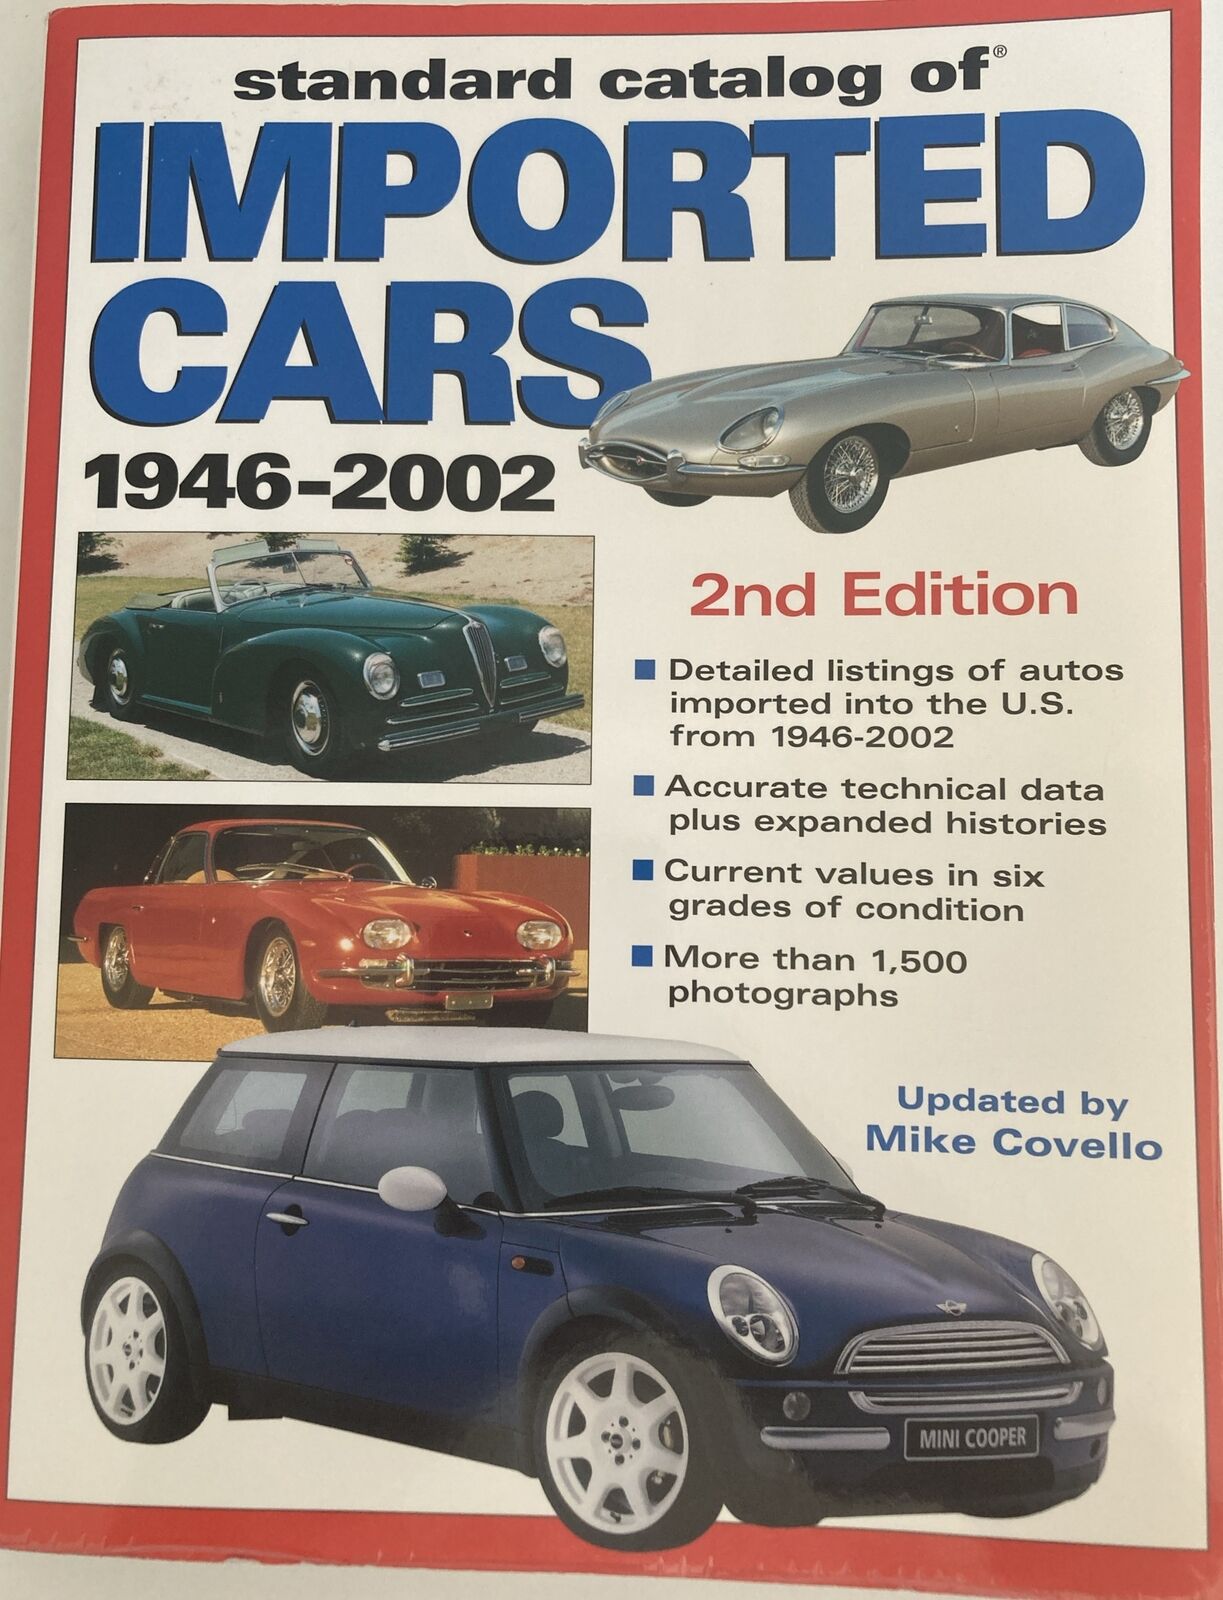 Standard Catalog Of Imported Cars 1946-2002, 2nd Edition. Mike Covello